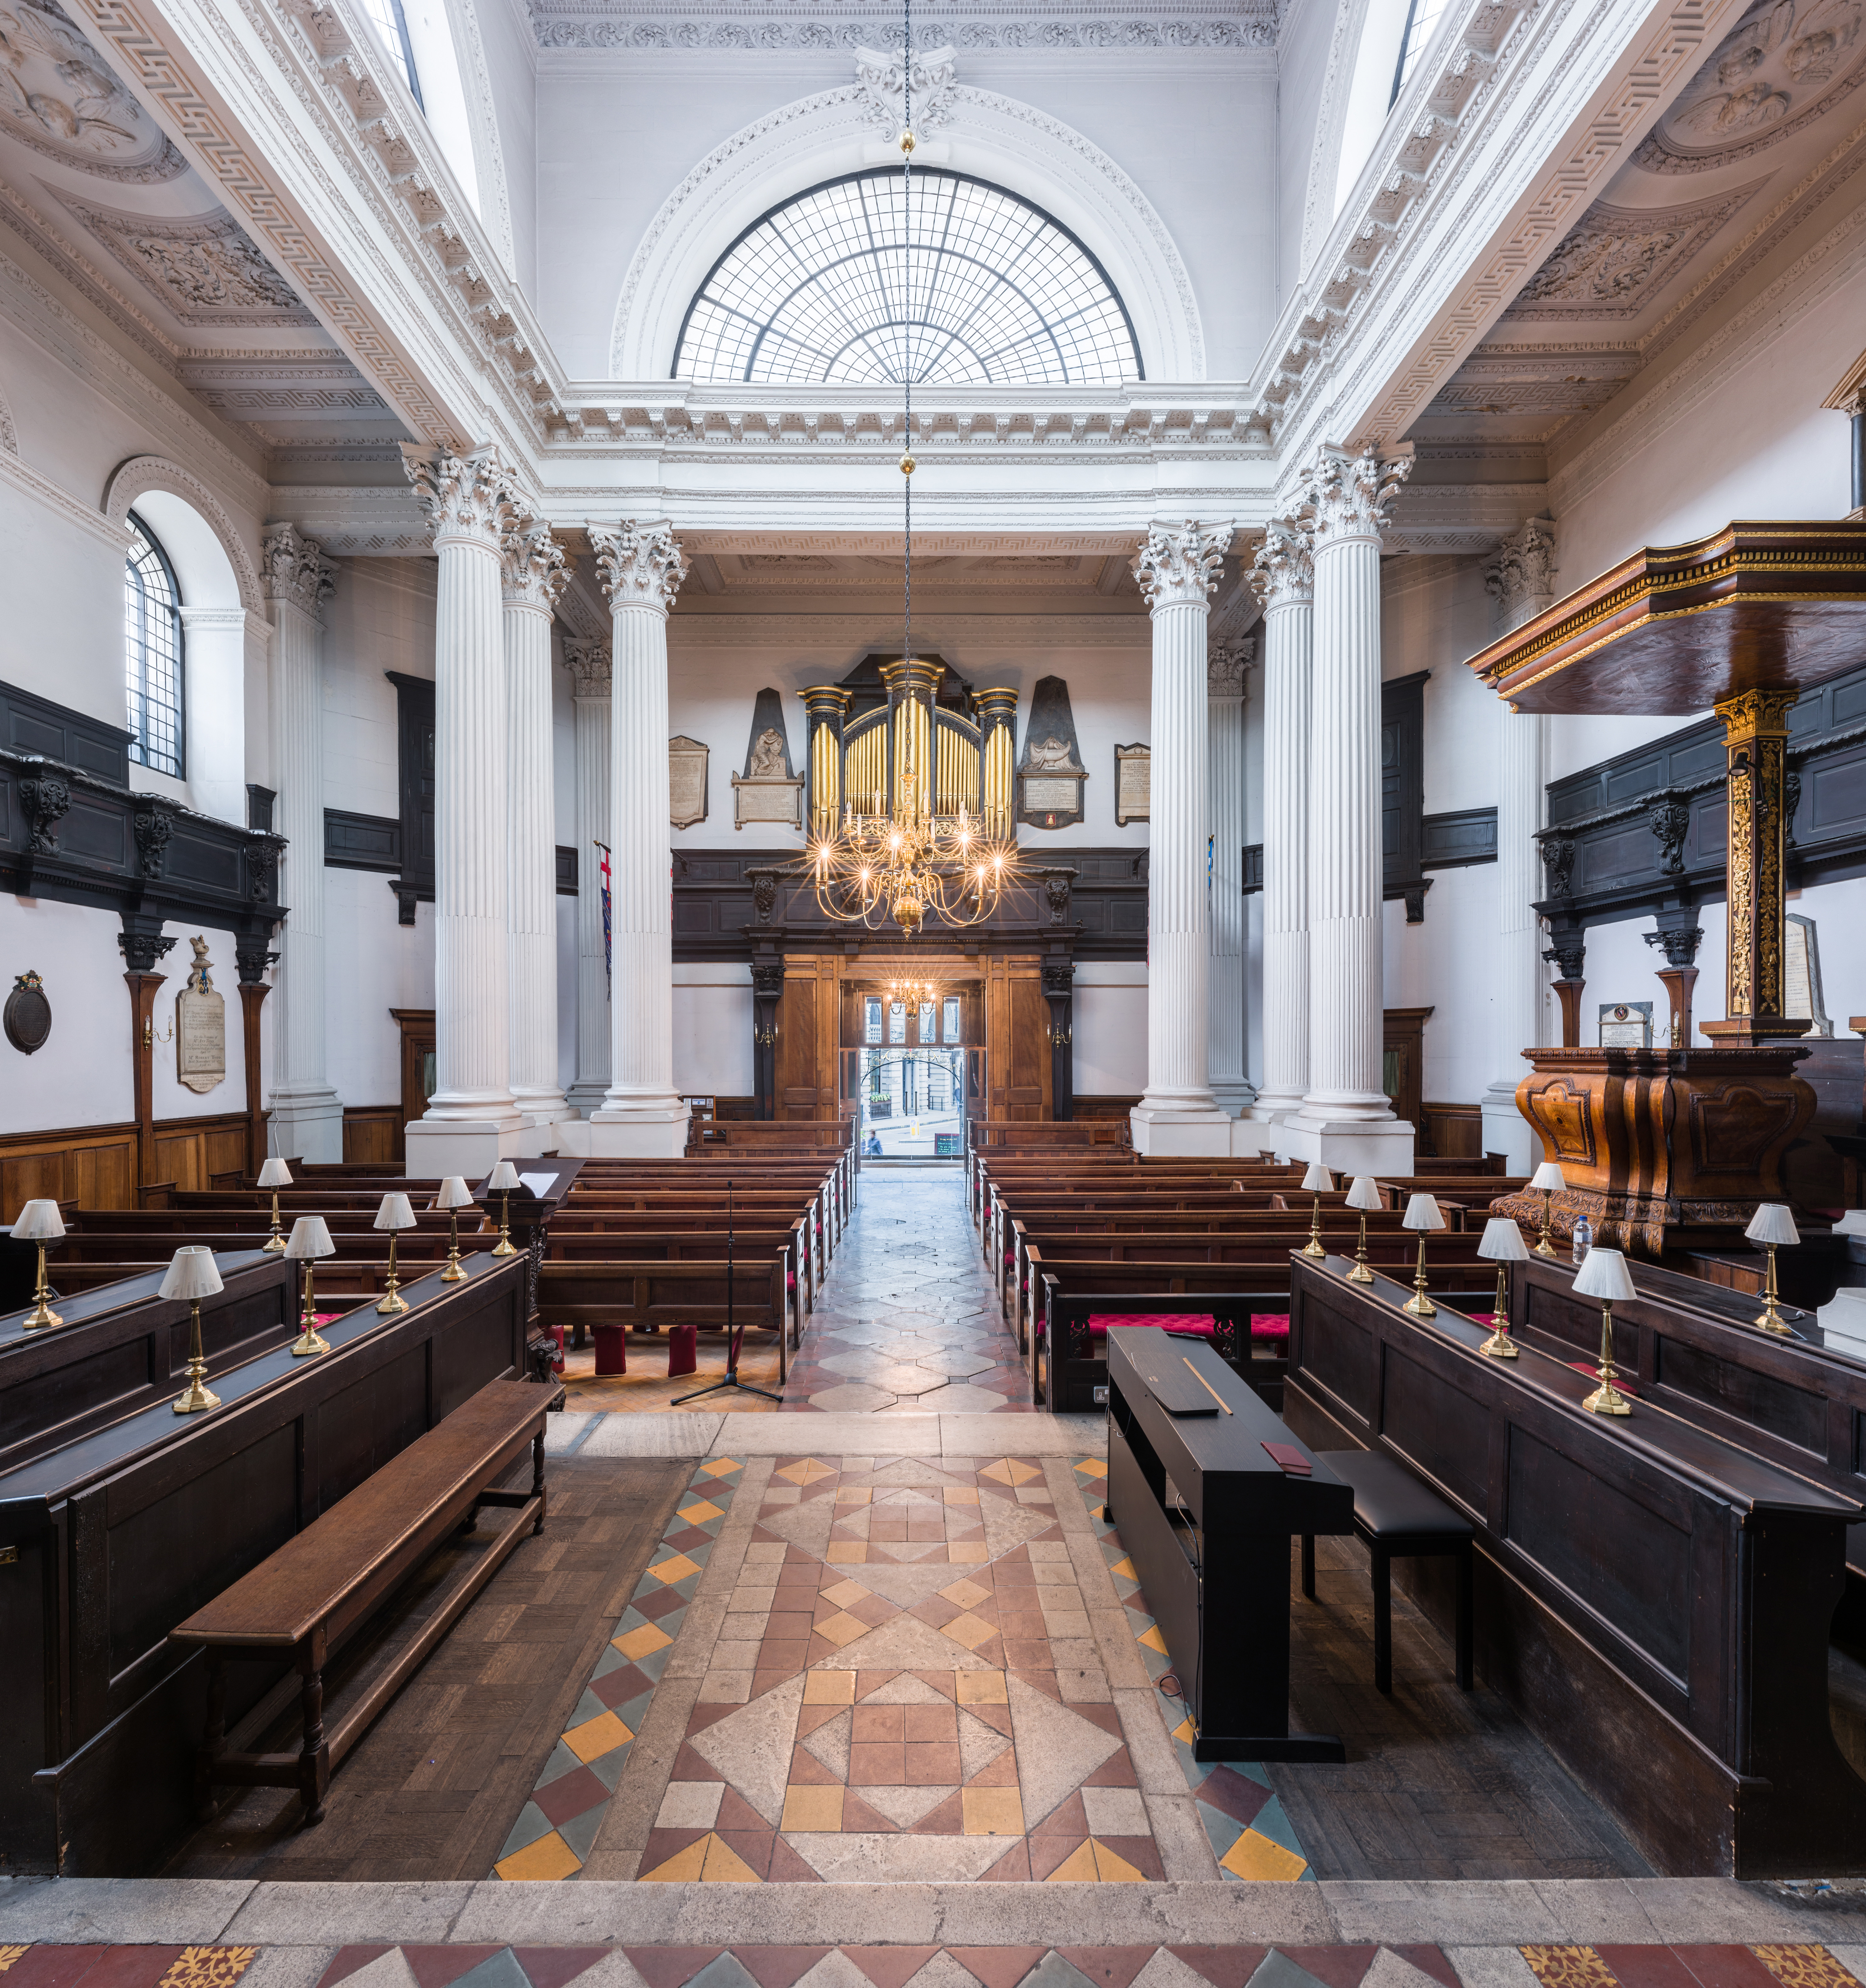 File:St Mary Woolnoth Interior Entrance, London, UK - Diliff.jpg ...